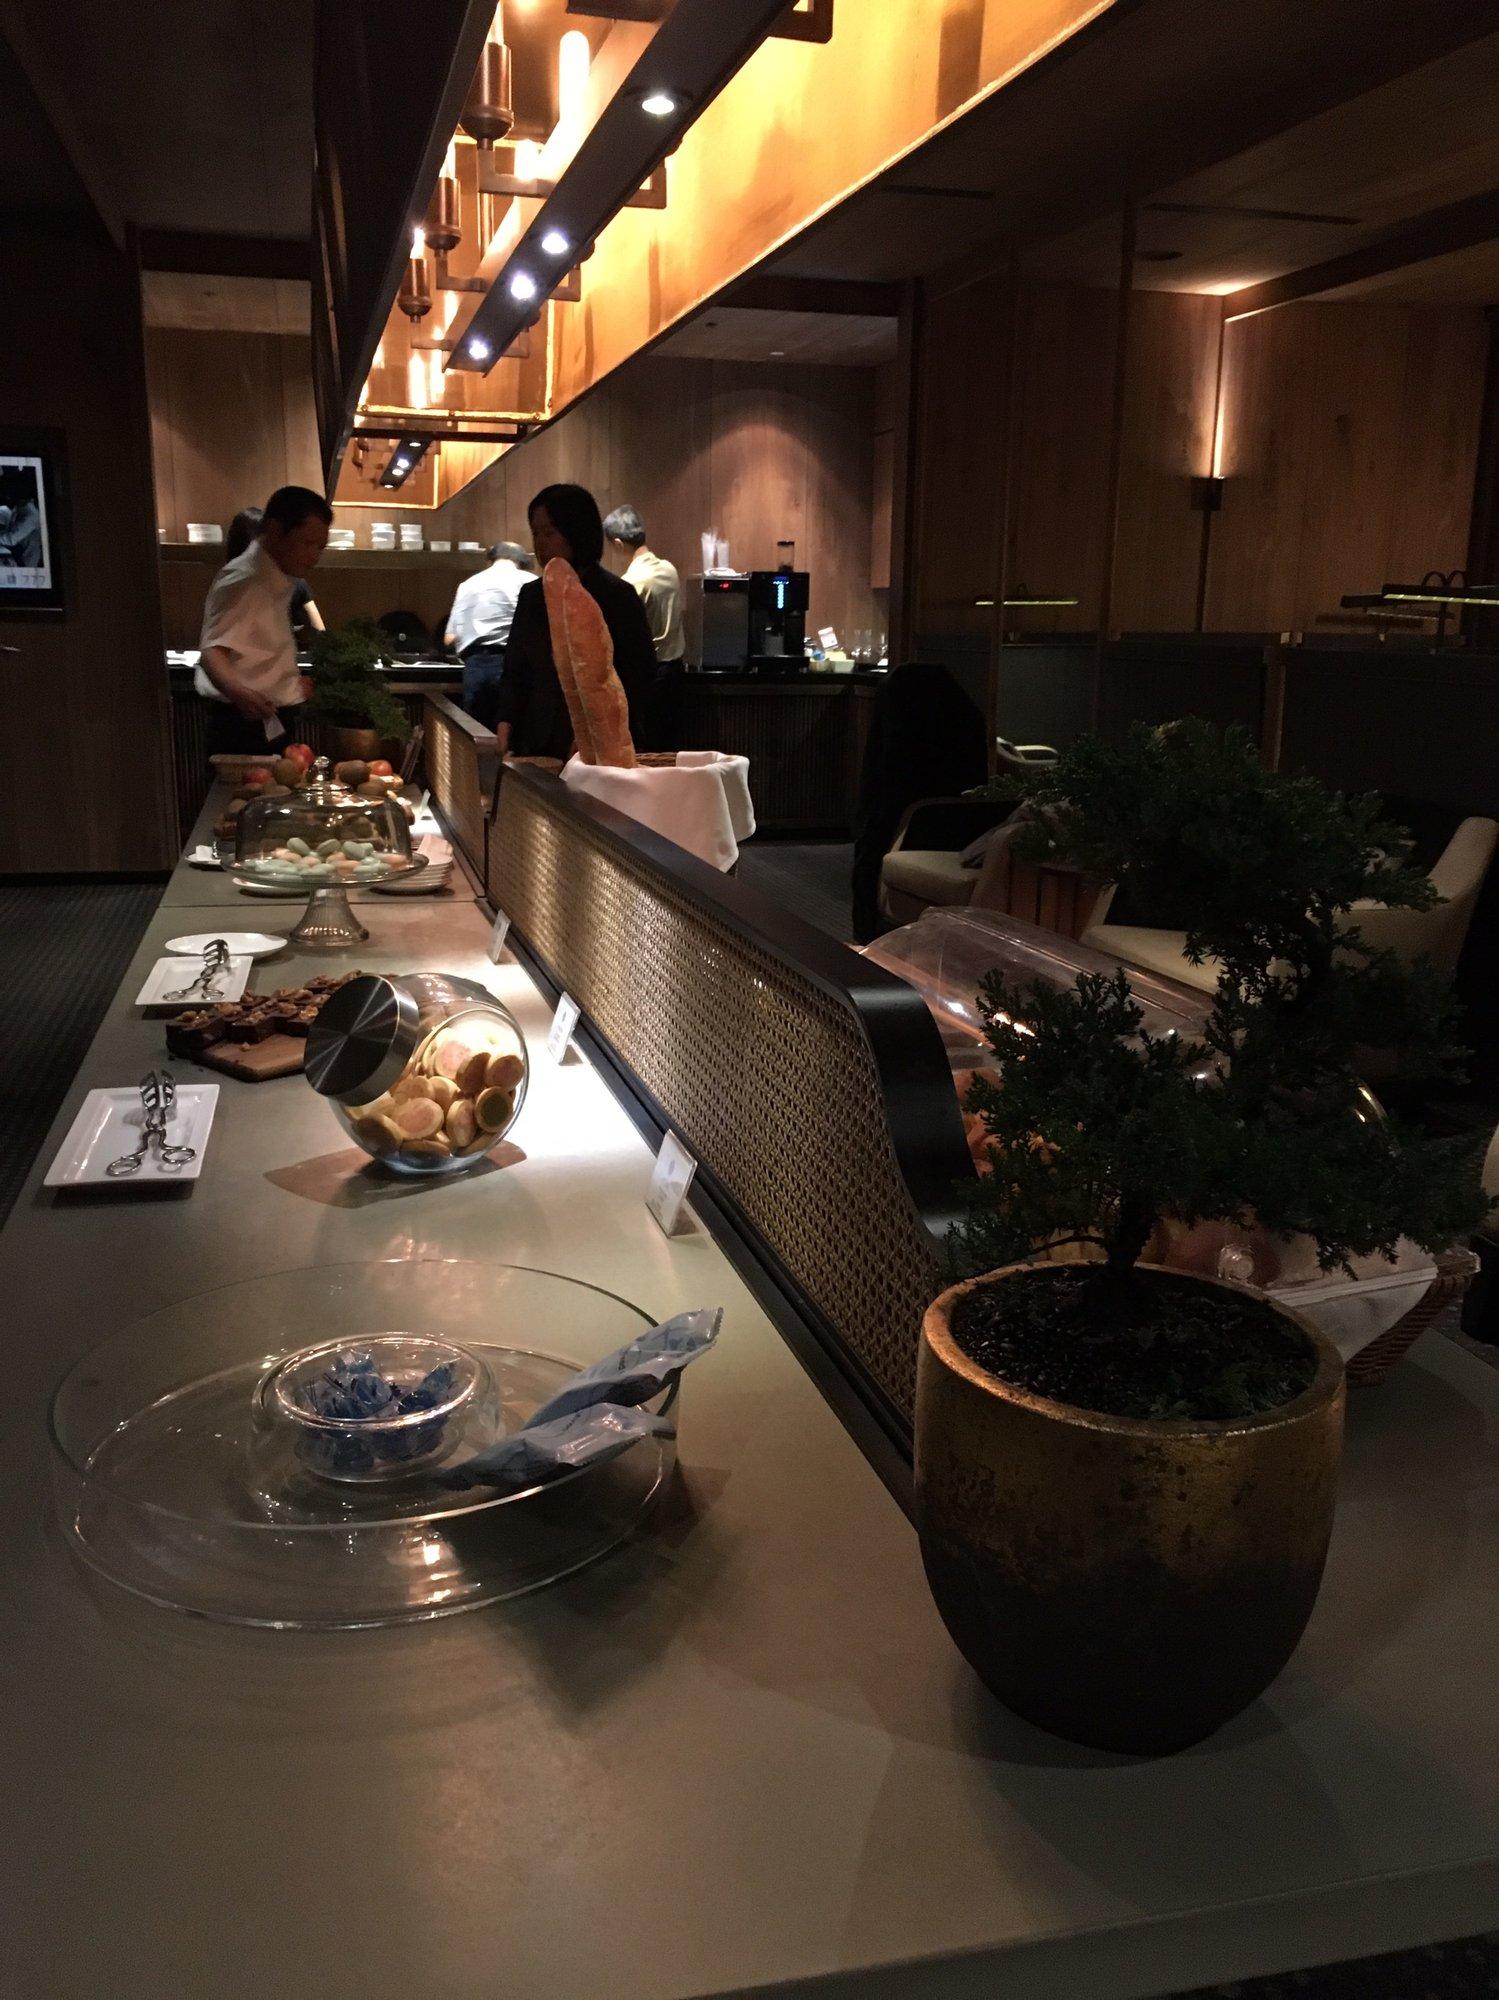 China Airlines Lounge (V1) image 27 of 44